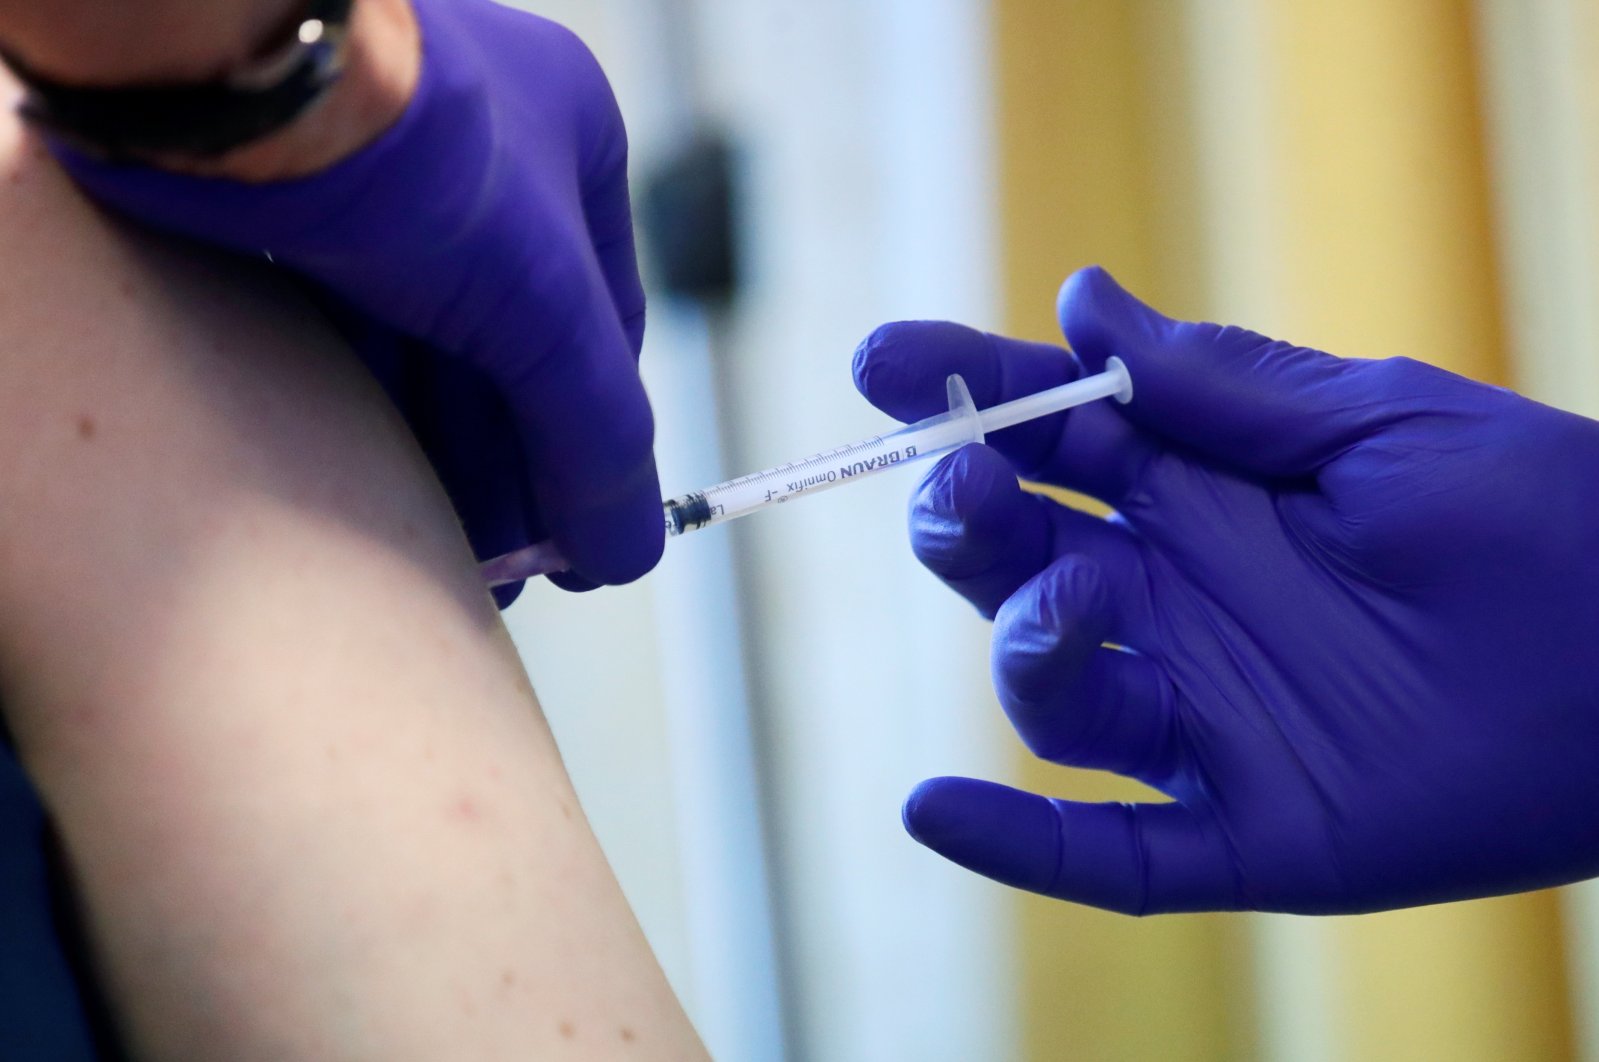 A patient receives a COVID-19 vaccine dose at a doctor's practice, Berlin, Germany, March 11, 2021. (Reuters Photo)